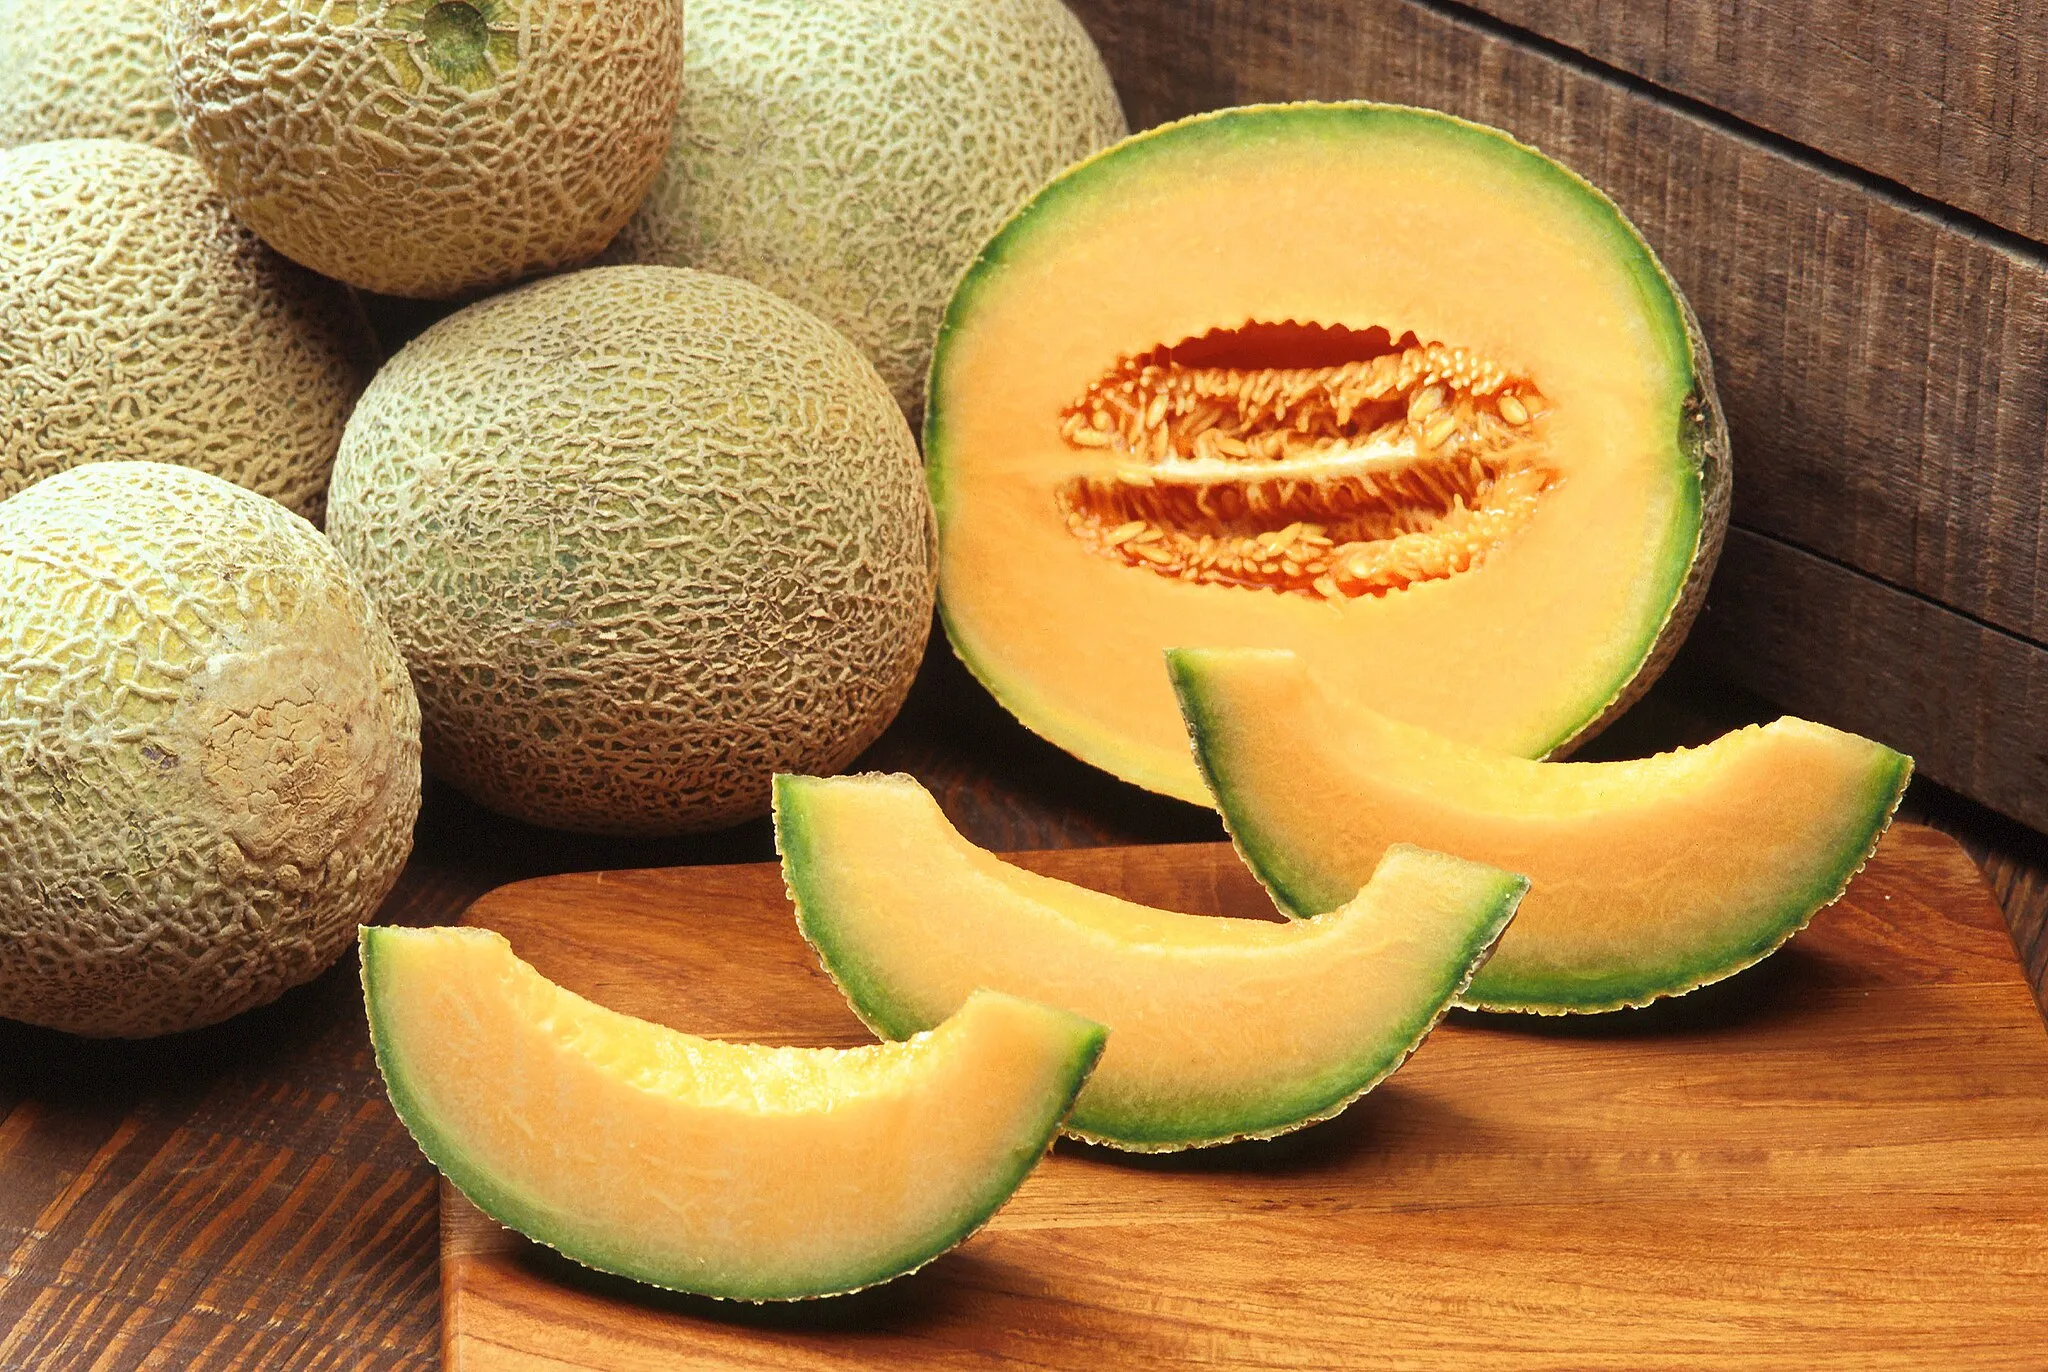 Photo showing: North American "cantaloupes", actually a type of muskmelon.